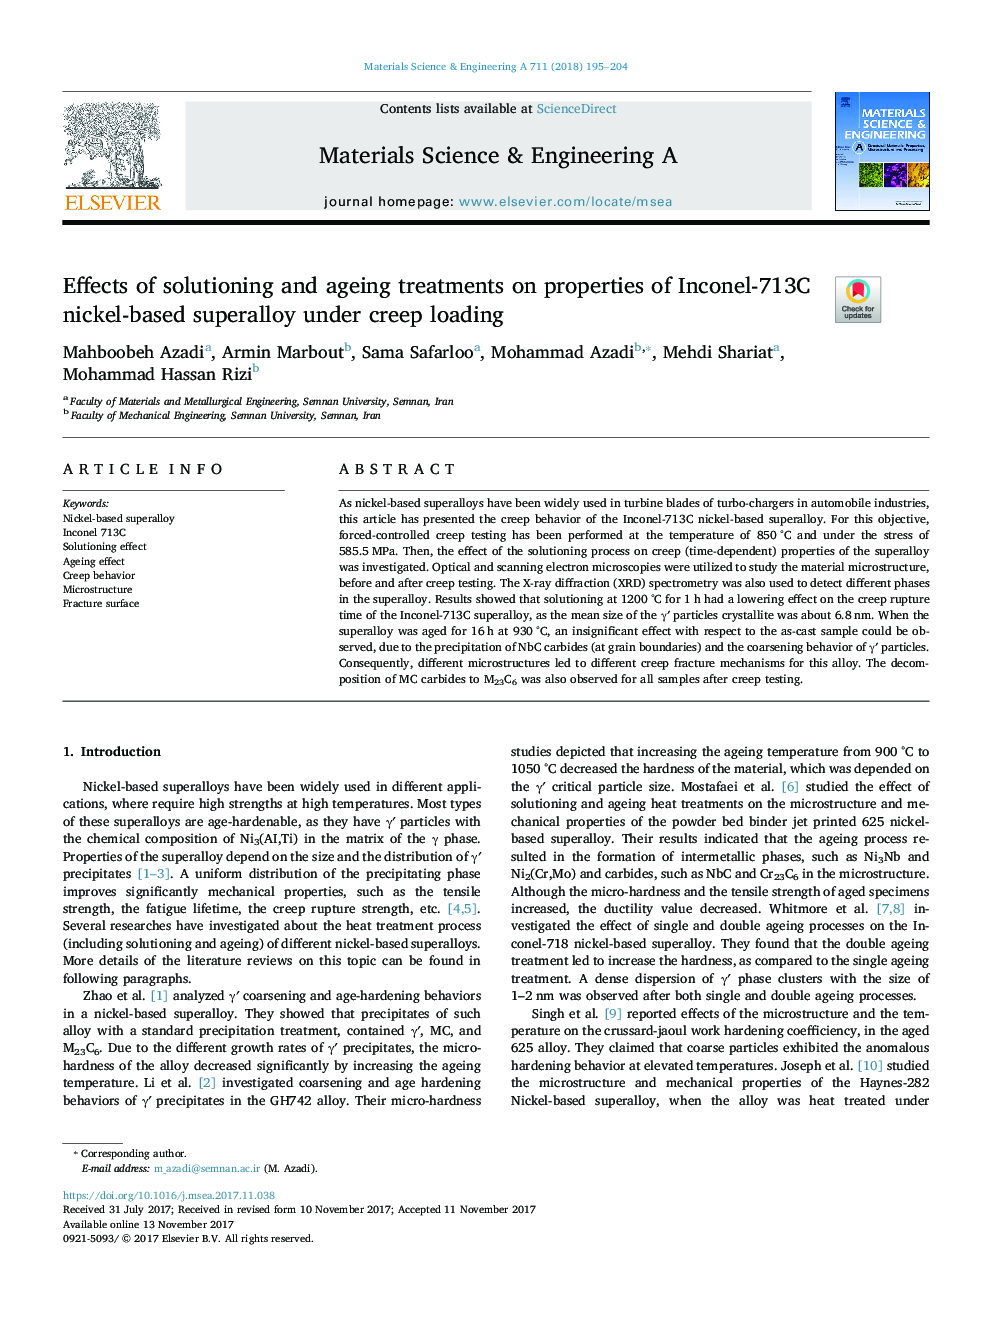 Effects of solutioning and ageing treatments on properties of Inconel-713C nickel-based superalloy under creep loading